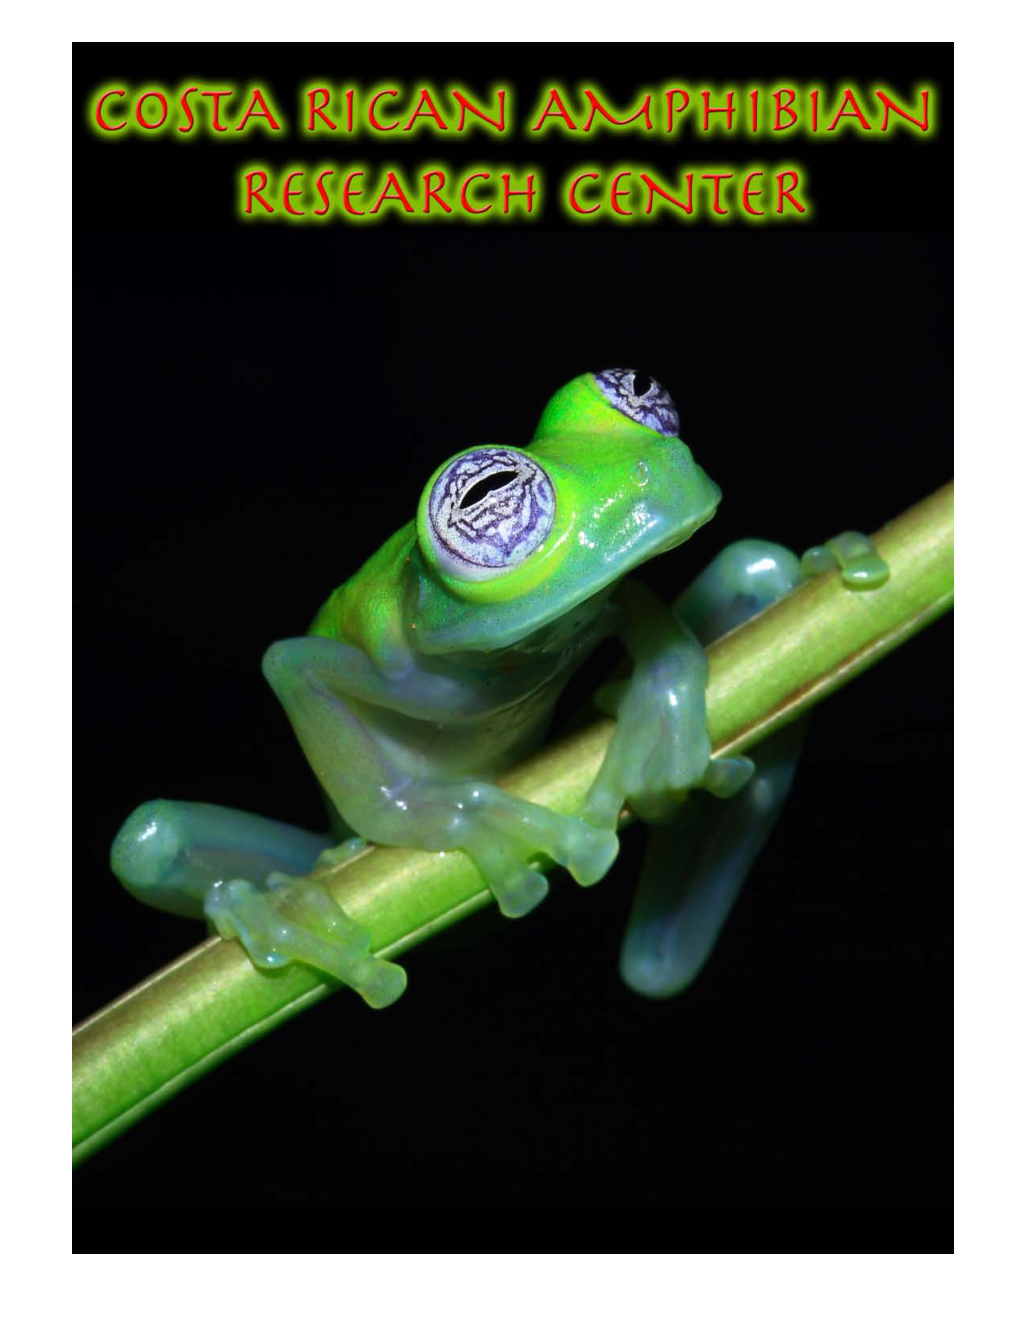 Dedicated to the Conservation and Biological Research of Costa Rican Amphibians”